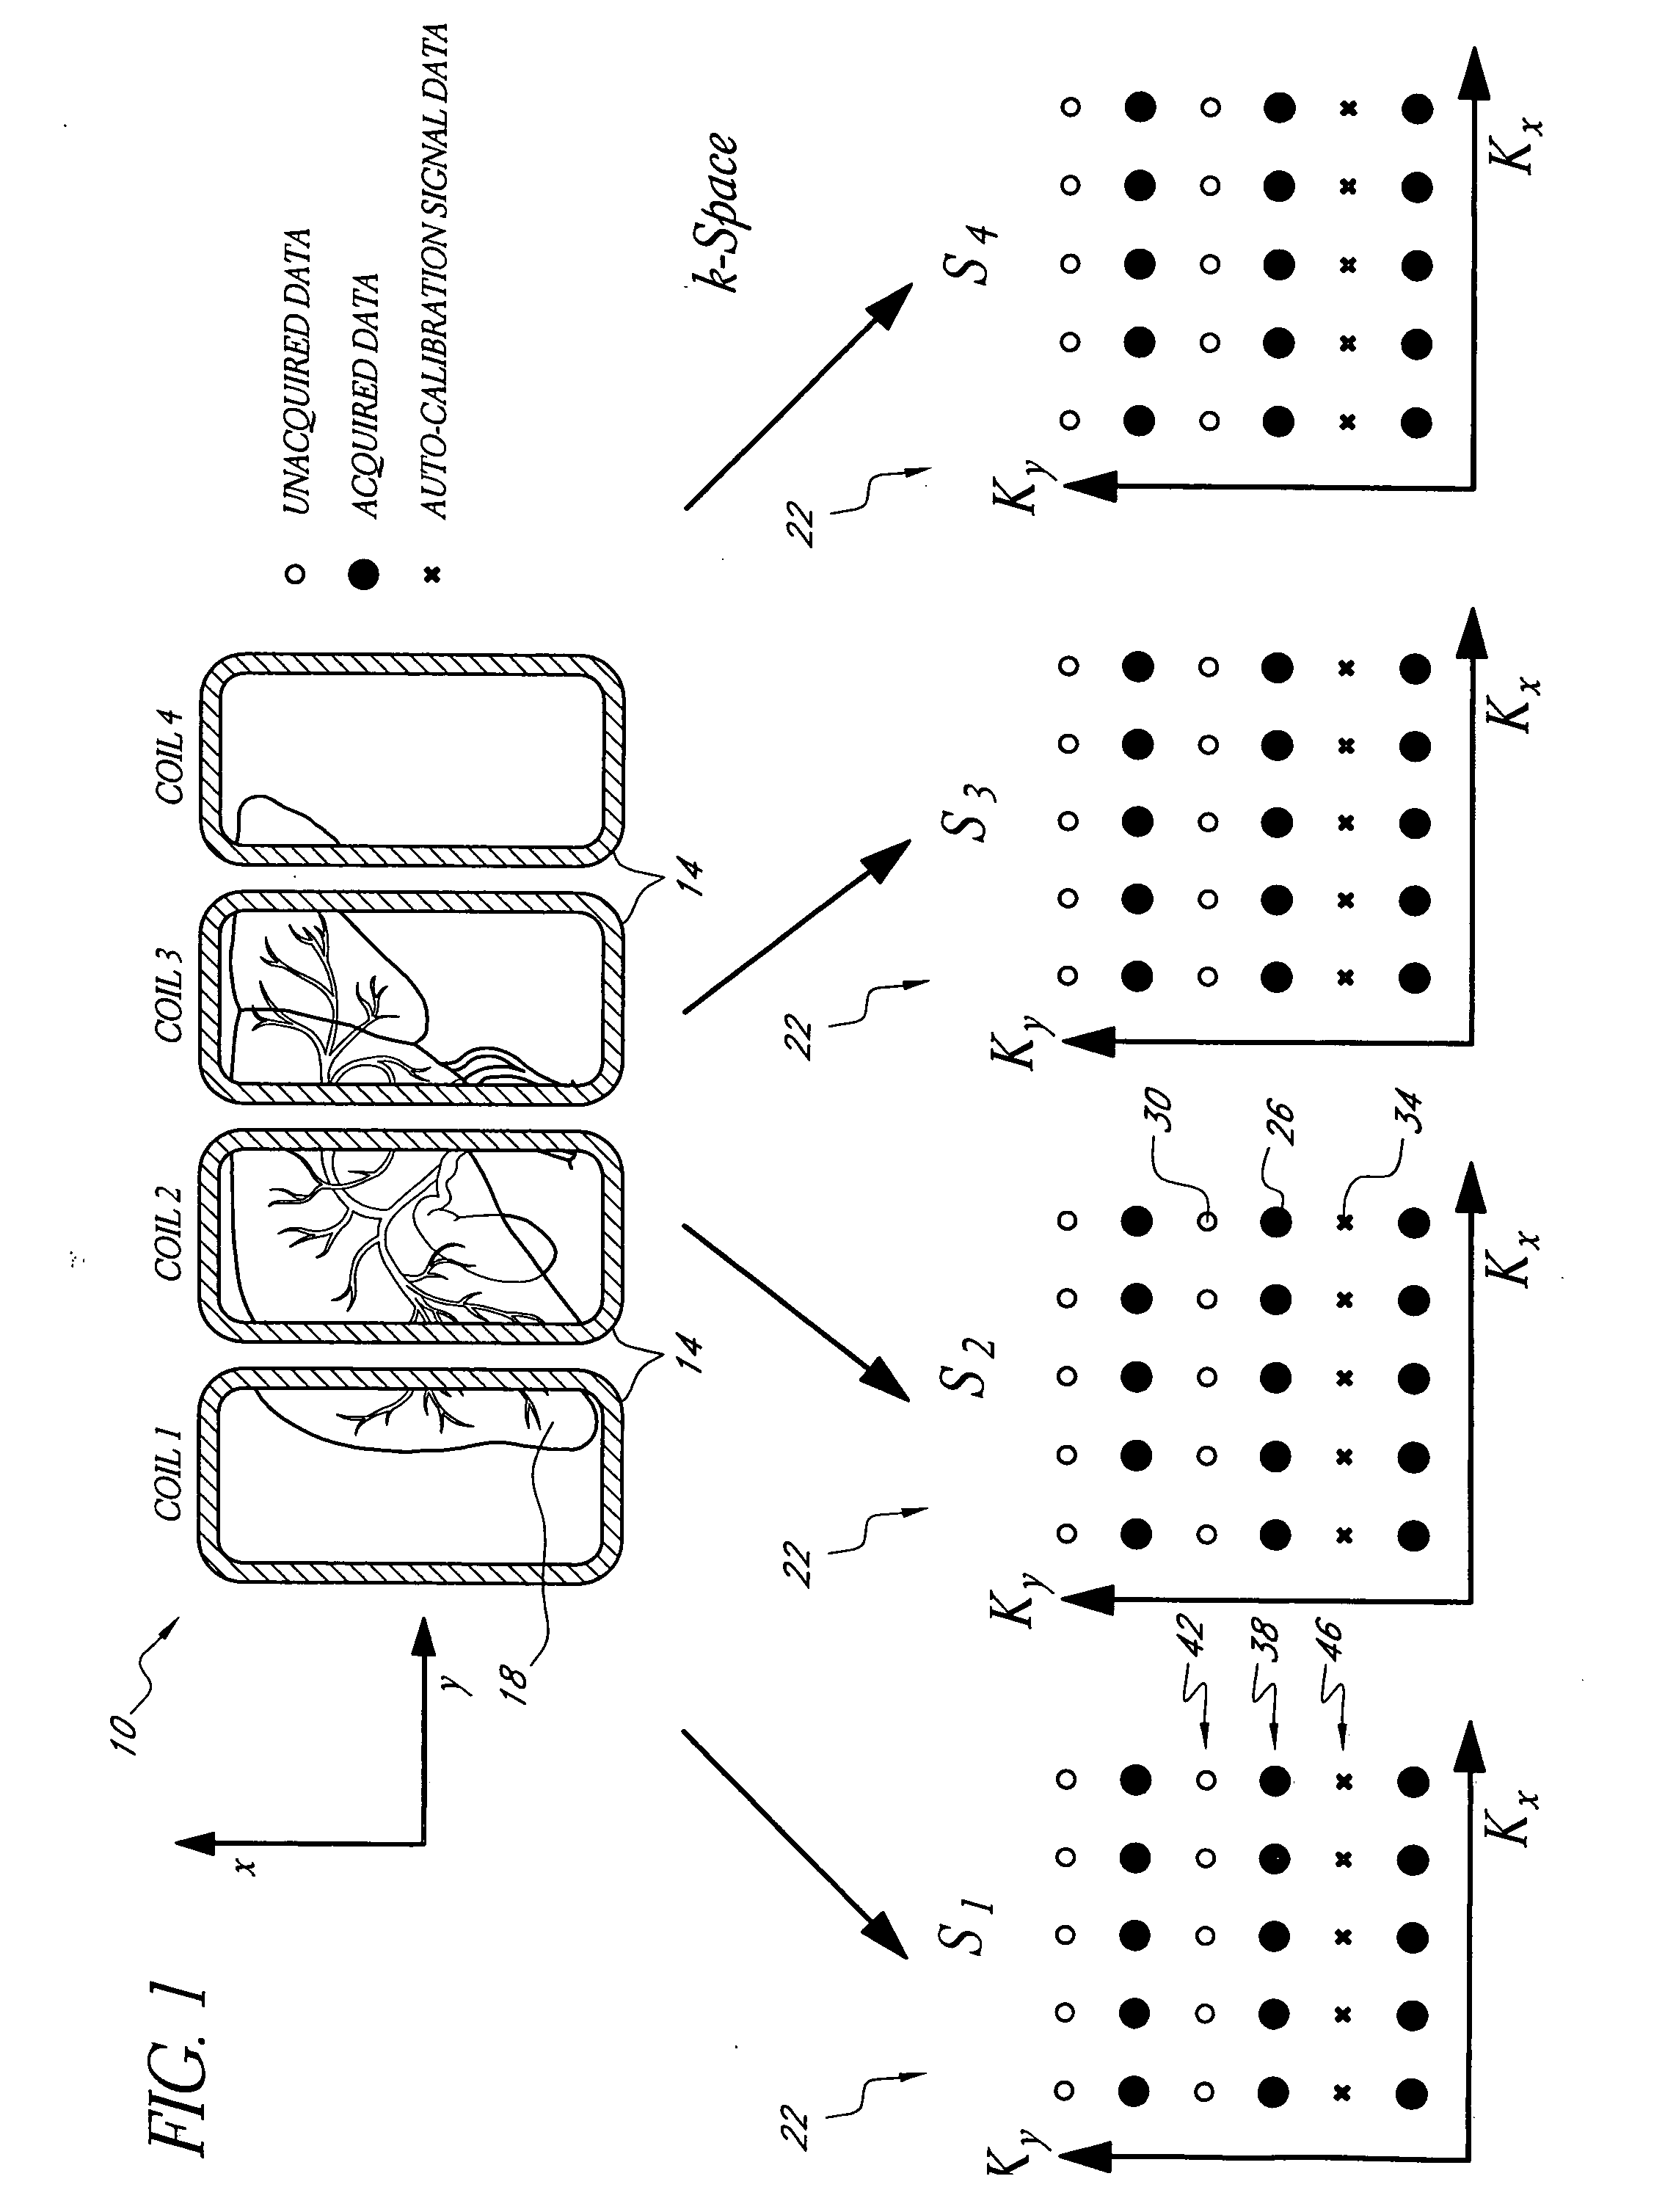 Systems and methods for image reconstruction of sensitivity encoded MRI data